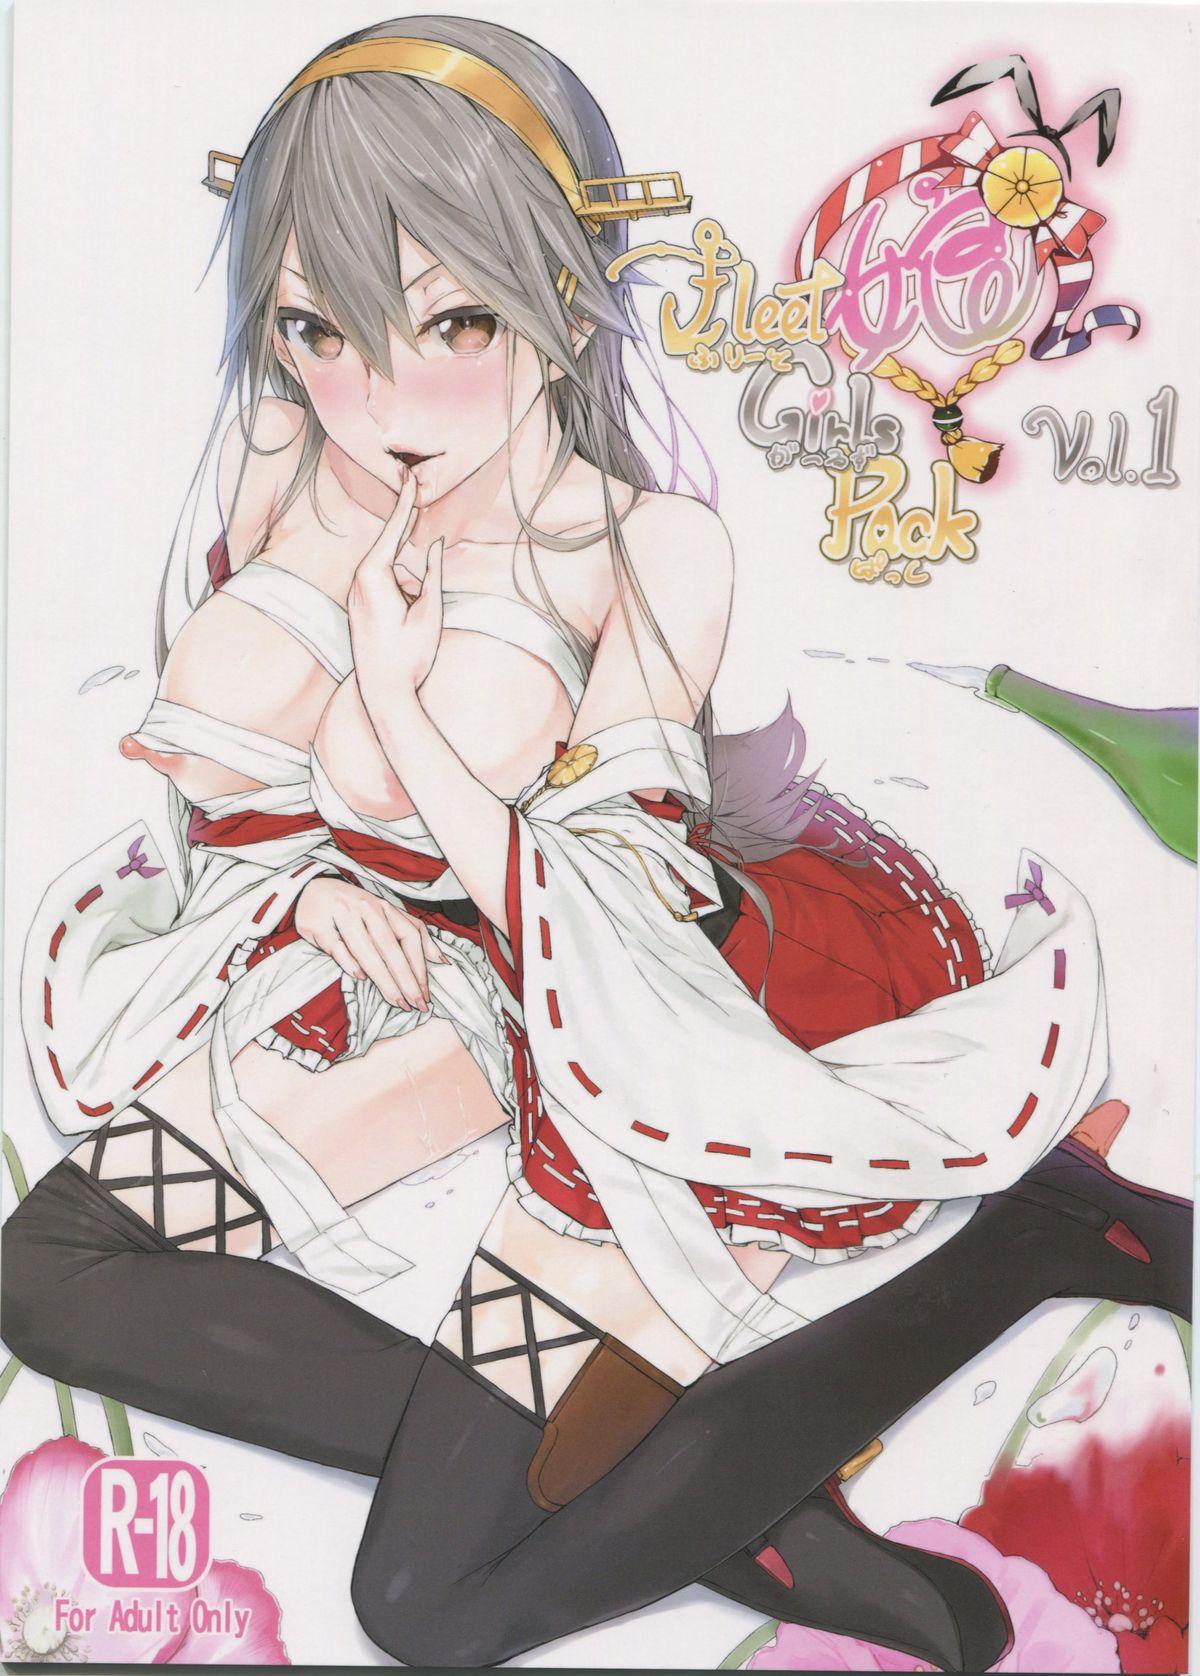 Tongue Fleet Girls Pack vol. 1 - Kantai collection Phat - Picture 1